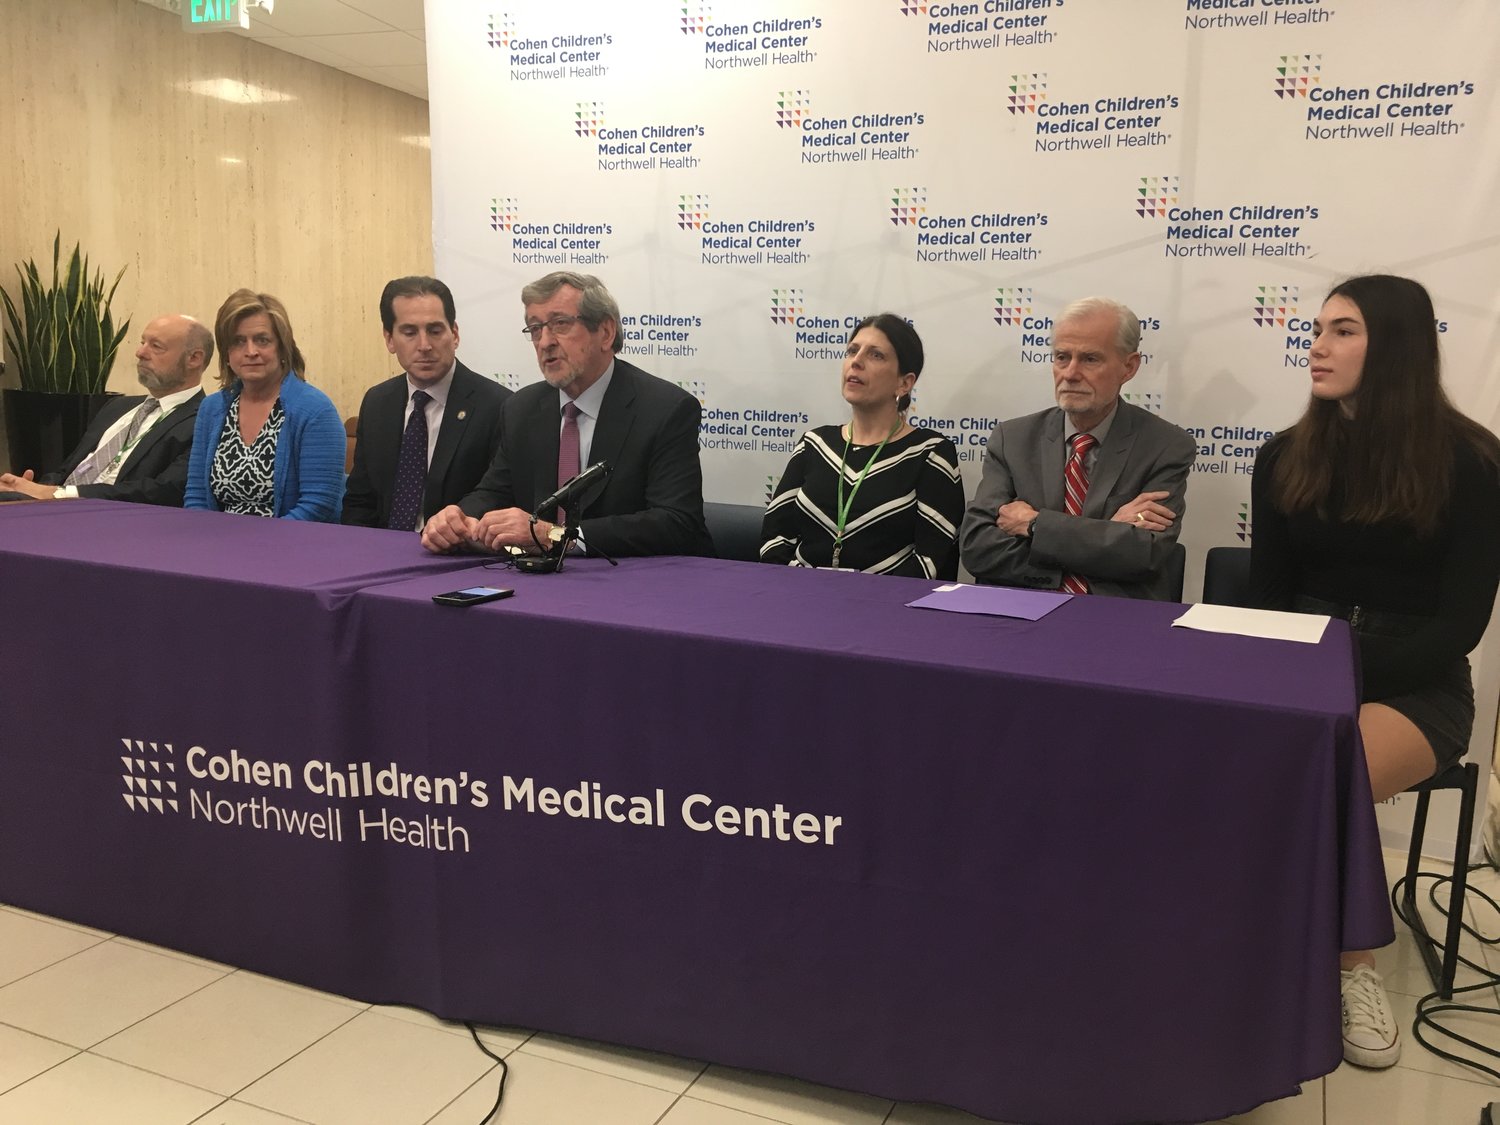 Michael Dowling, president and chief executive of Northwell Health, center, spoke at the opening of the Behavioral Health Center